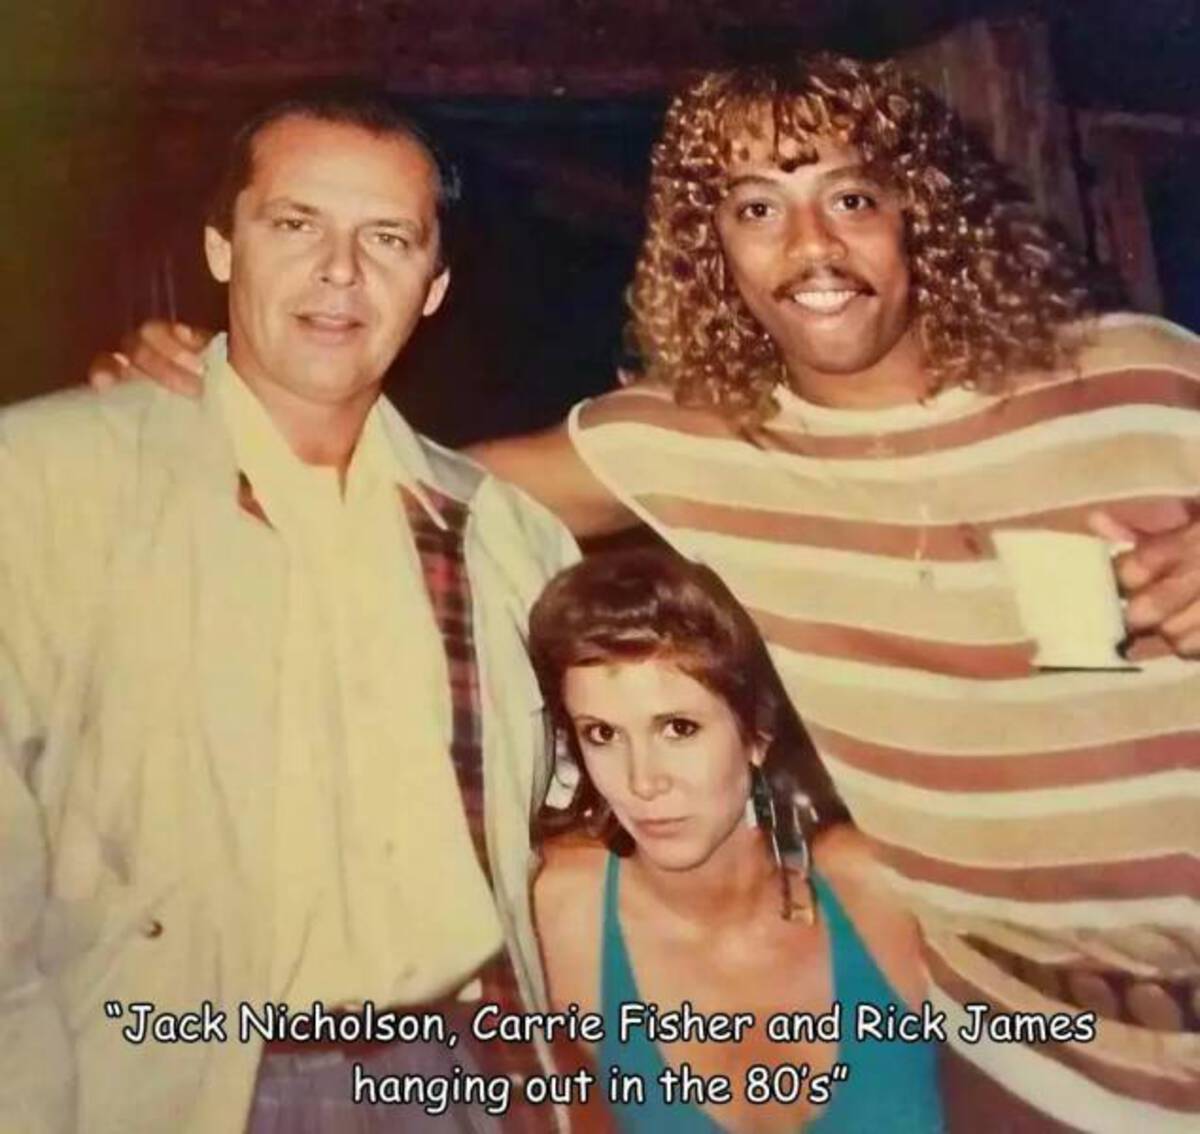 jack nicholson carrie fisher rick james - "Jack Nicholson, Carrie Fisher and Rick James hanging out in the 80's"